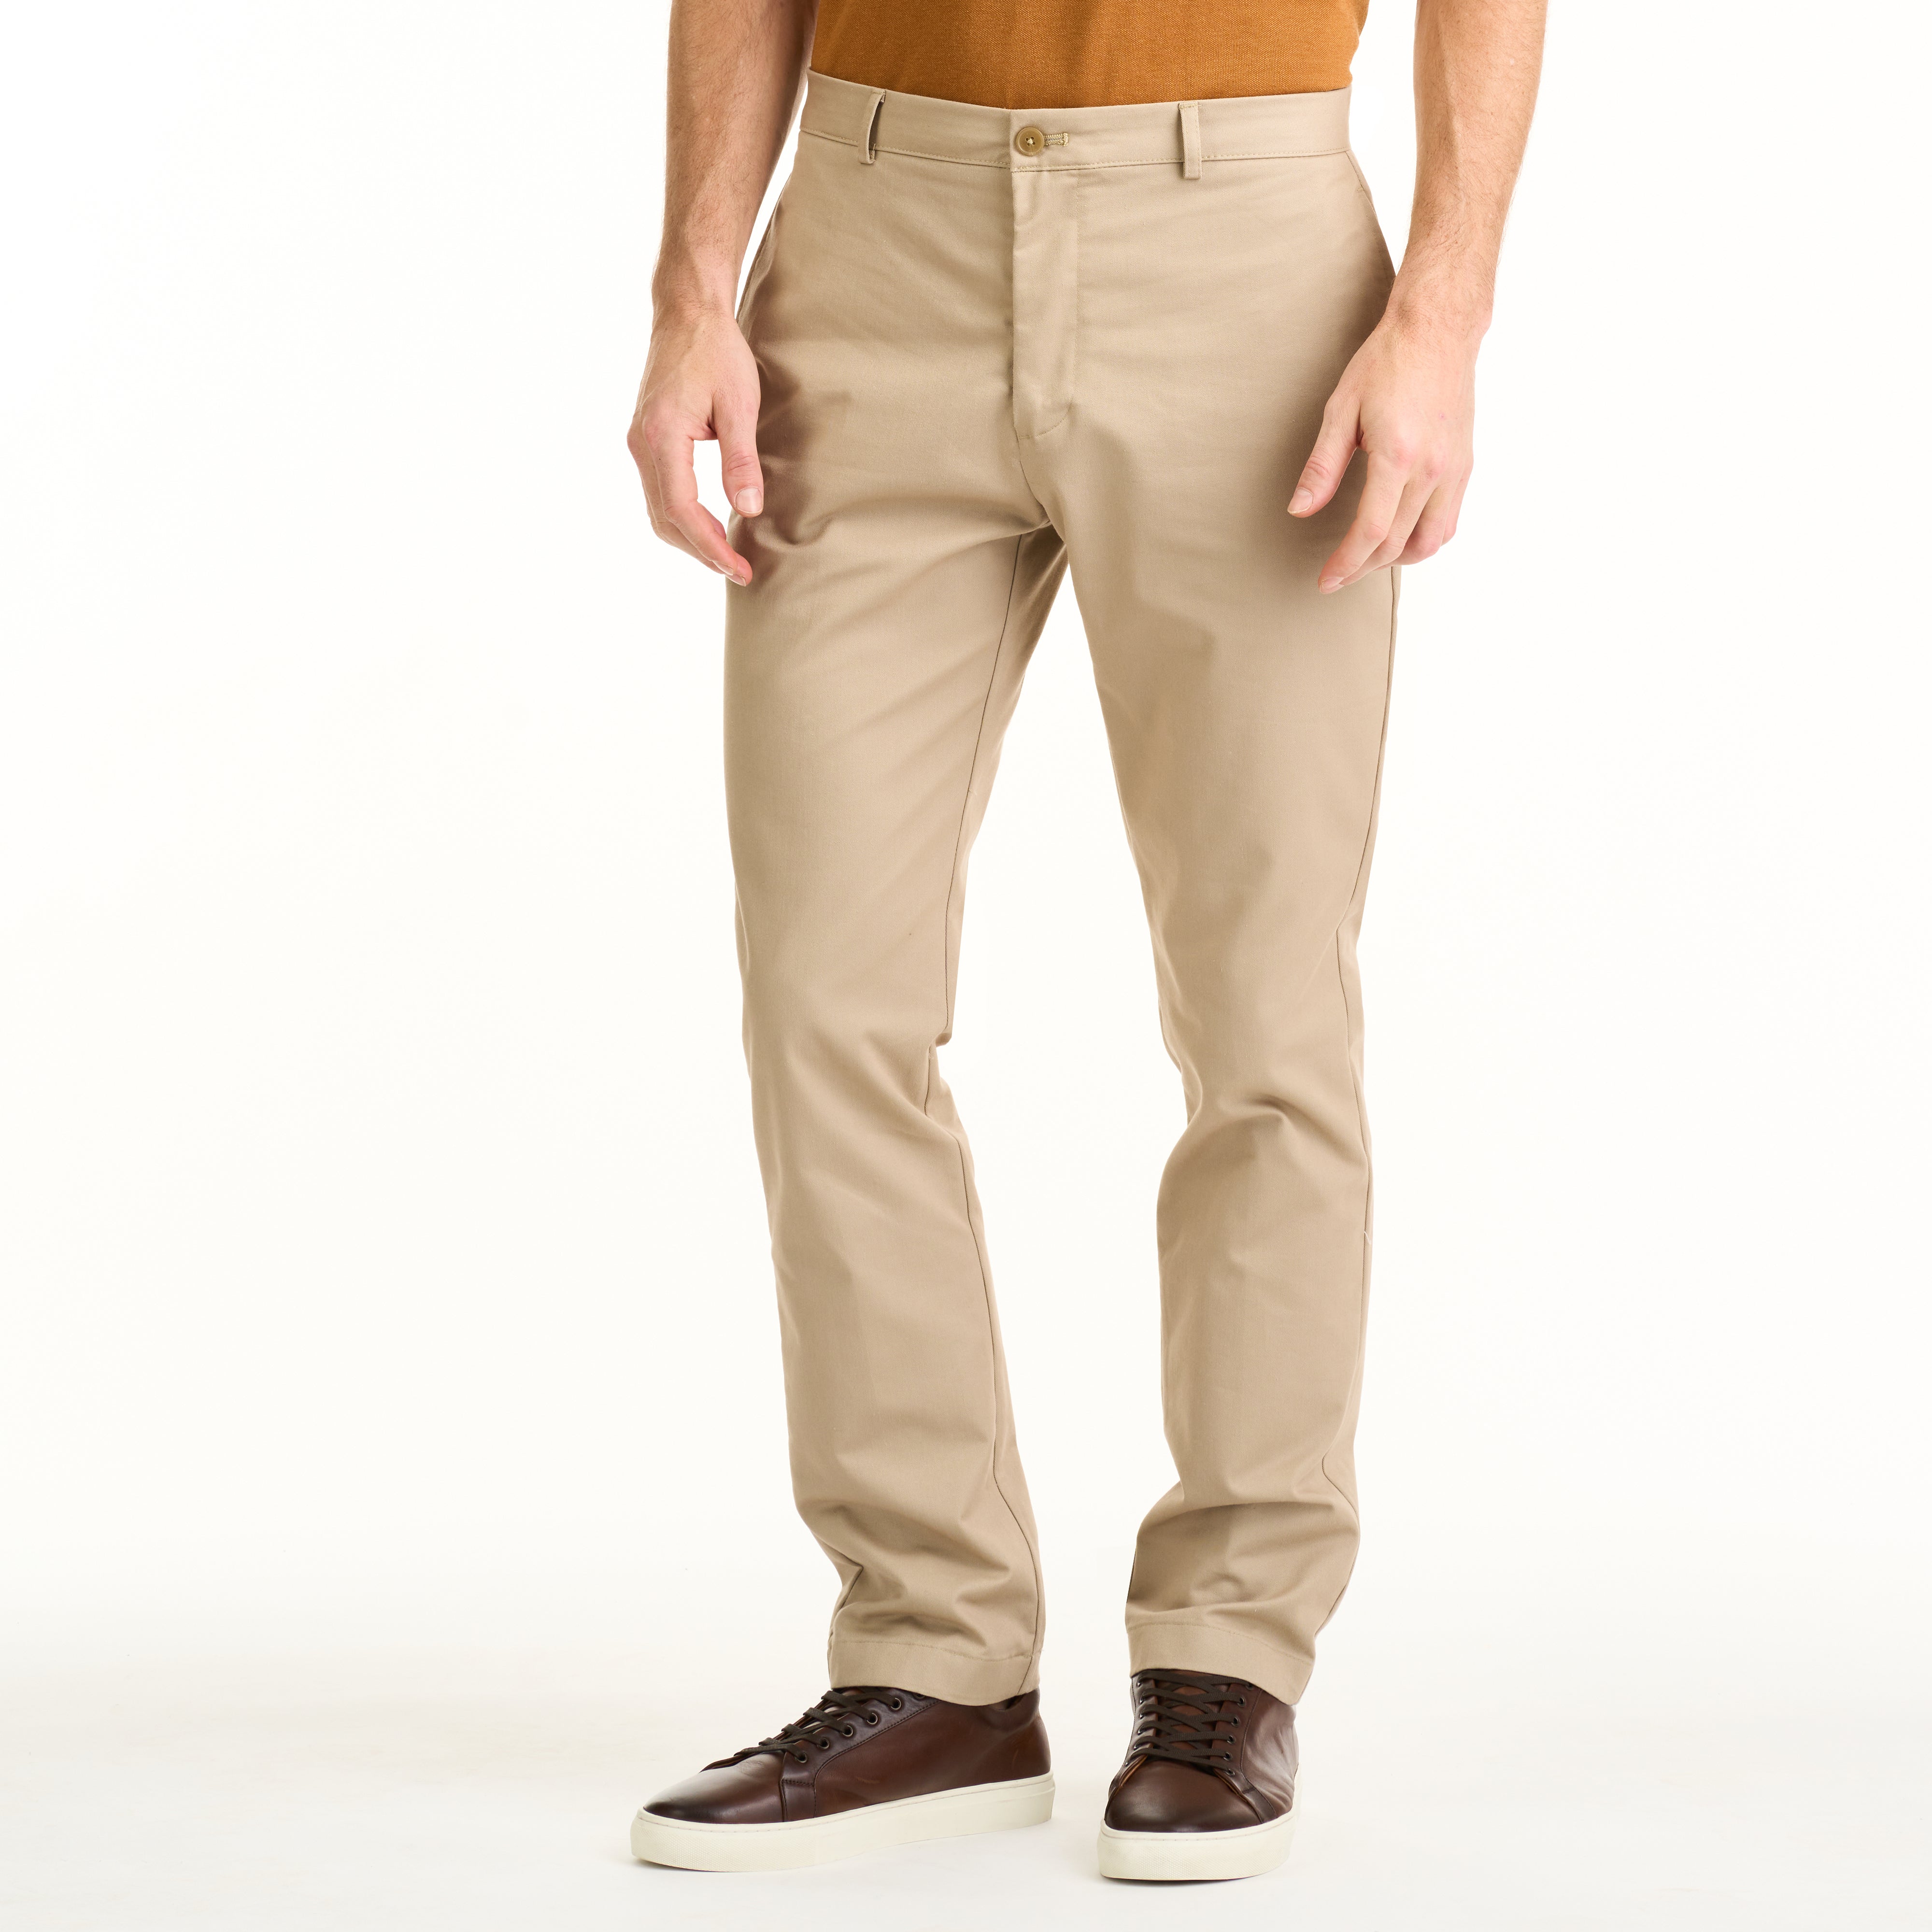 Buy The Pant Project Men Tailored Slim Fit Wrinkle Free Cargos - Trousers  for Men 21811860 | Myntra